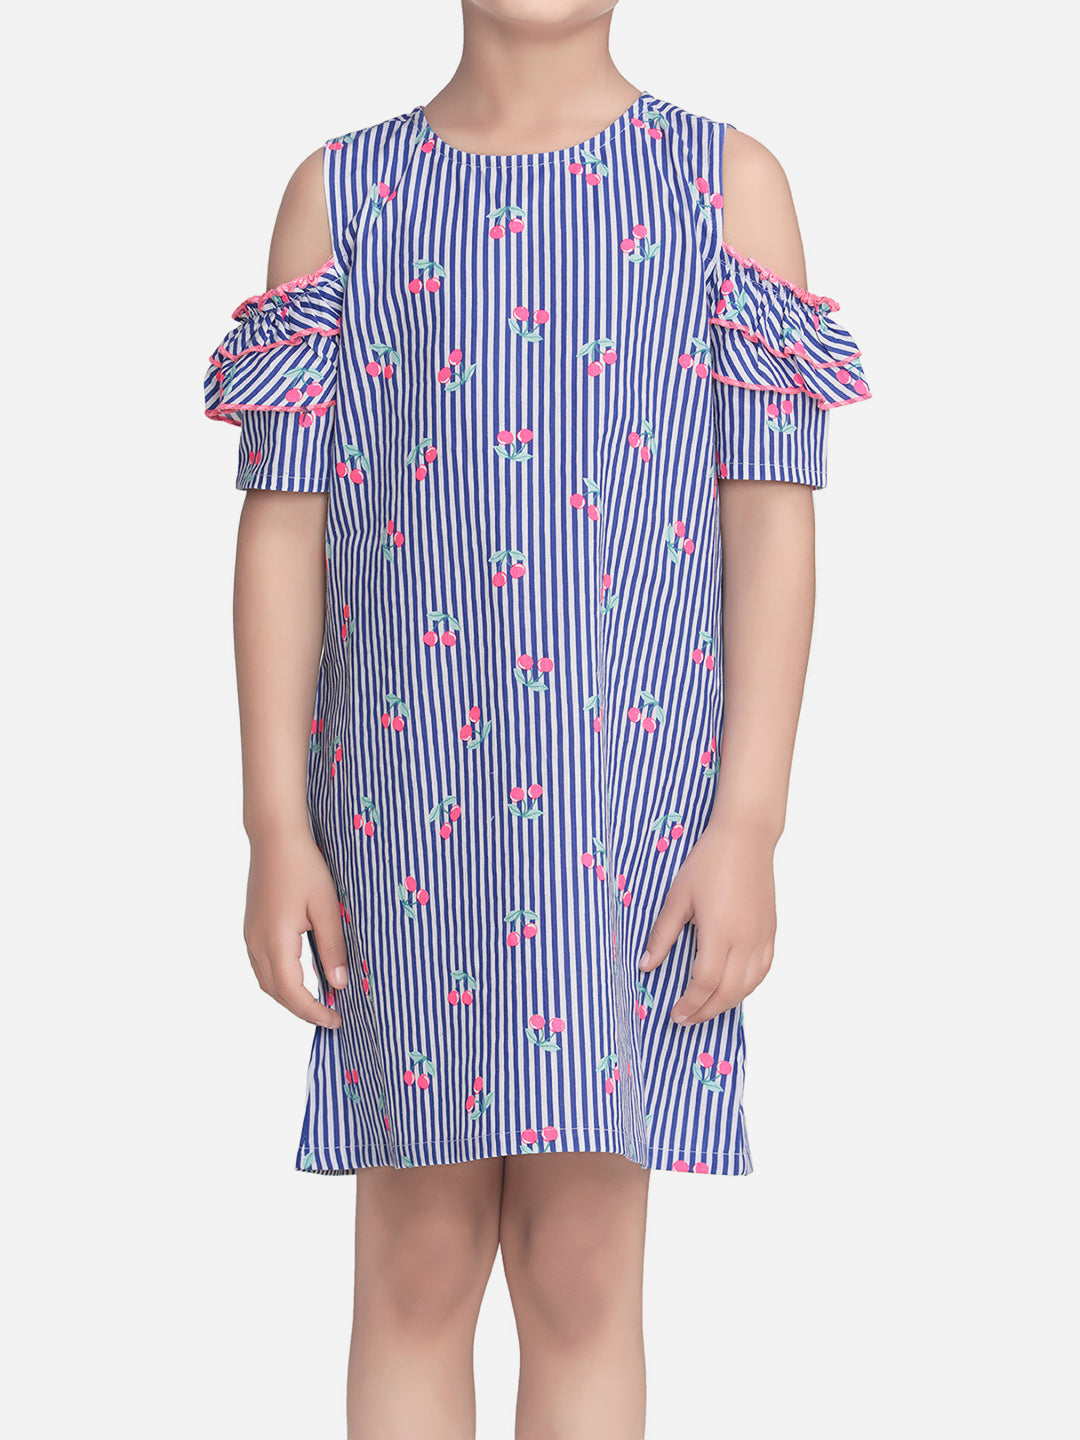 Cotton Blue Stripe and Cherry Print Cold Shoulder Dress with Ruffle Sleeve